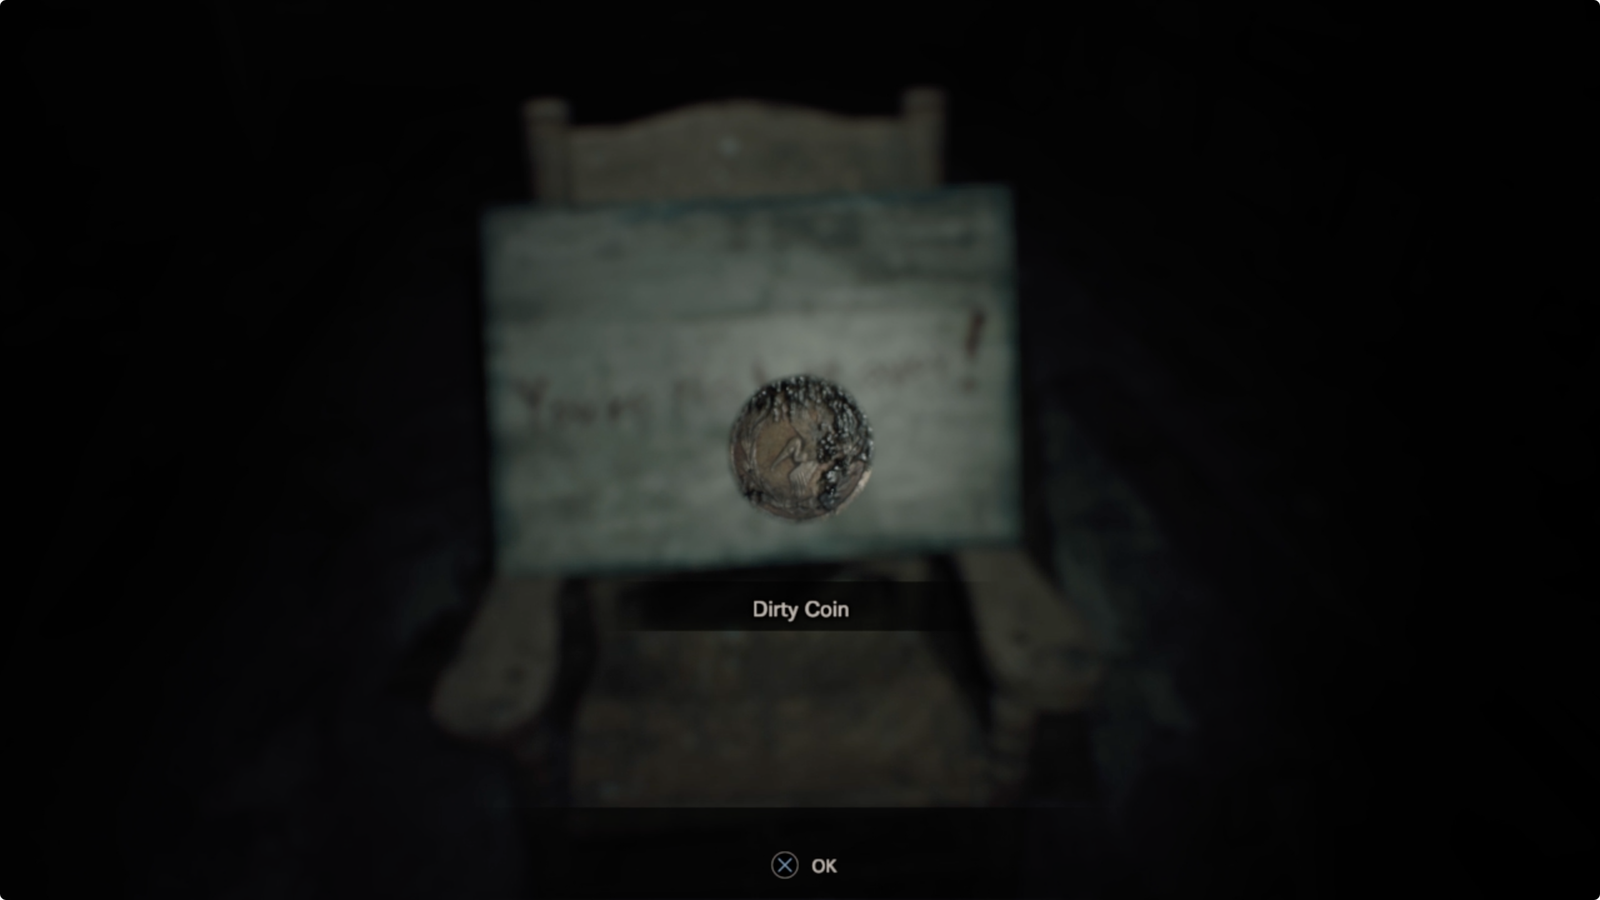 How to get the dirty coin in the Resident Evil 7 demo